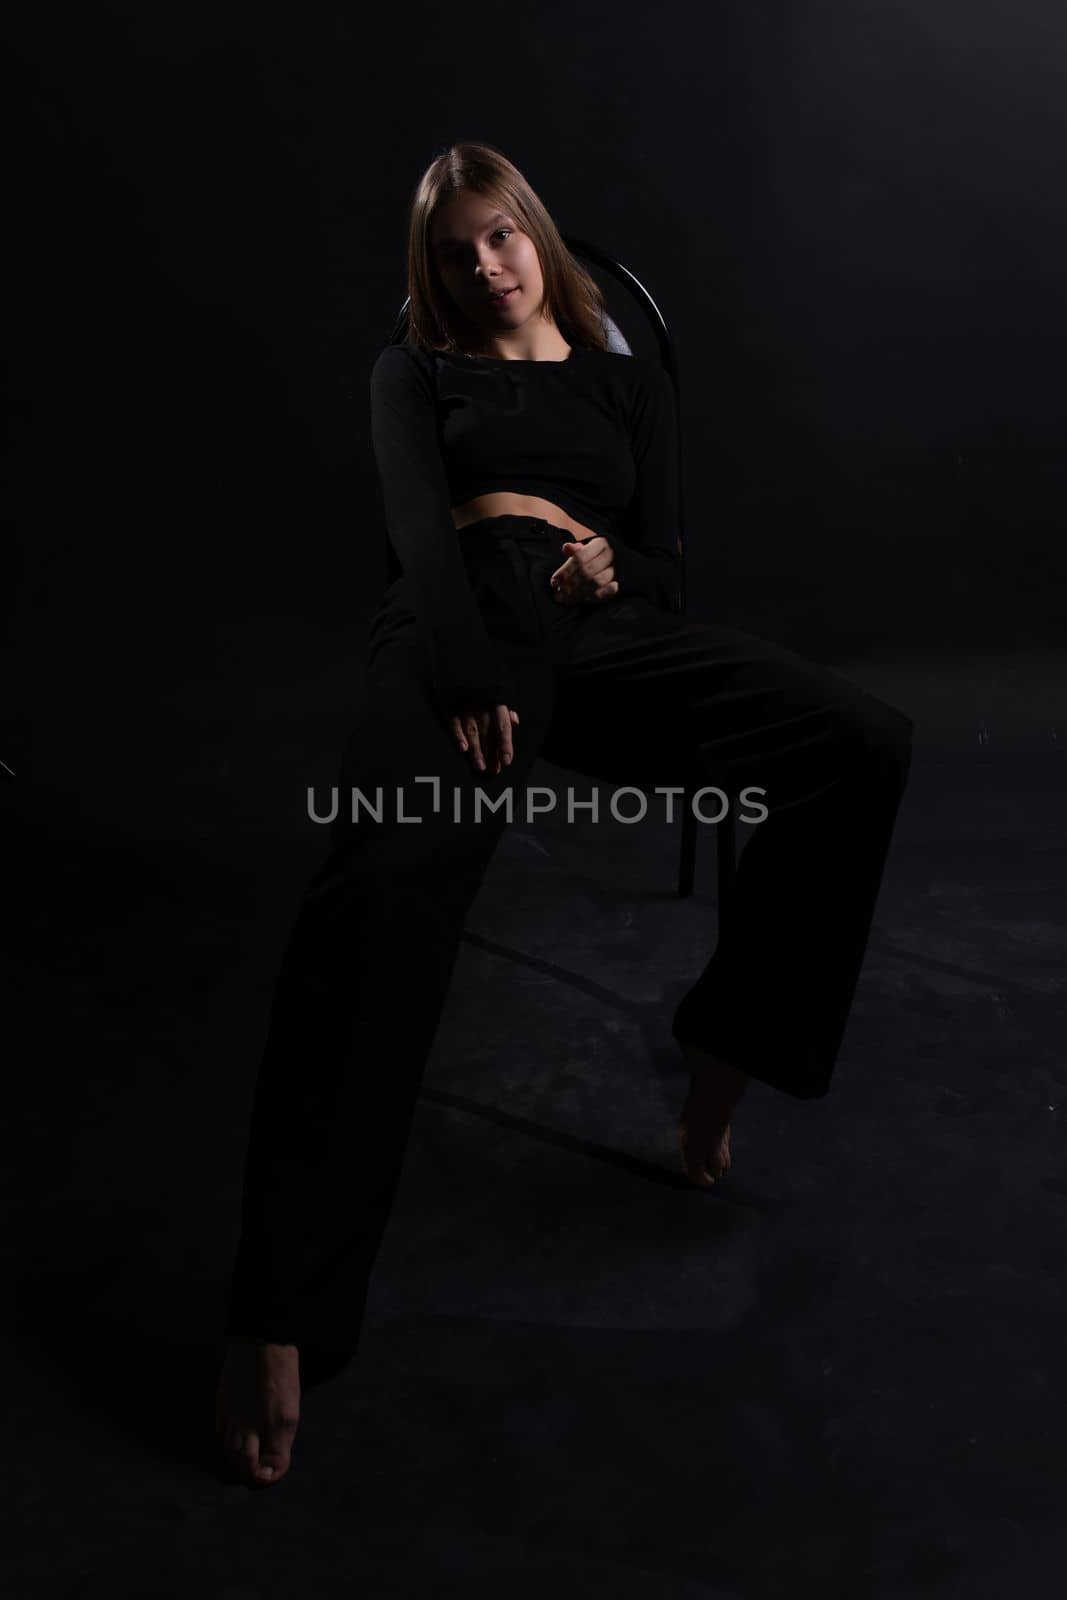 background black beautiful barefoot woman style model young studio chair girl beauty female by 89167702191